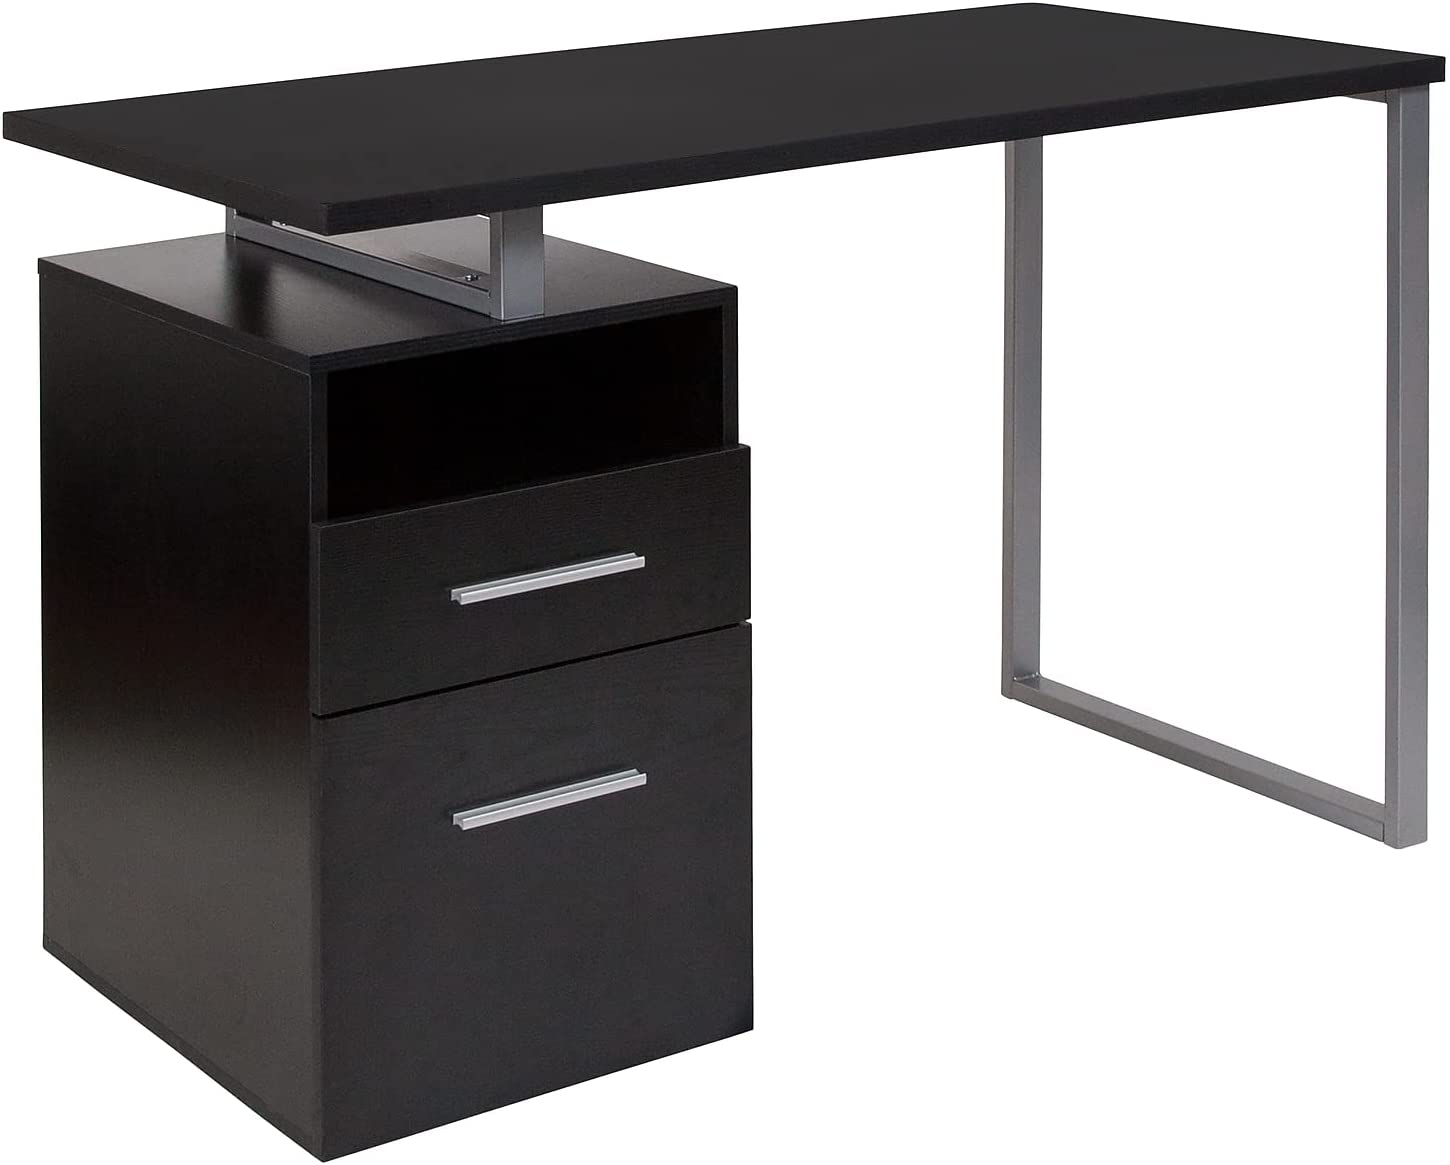 Flash Furniture Harwood Dark Ash Wood Grain Finish Computer Desk with Two Drawers and Silver Metal Frame